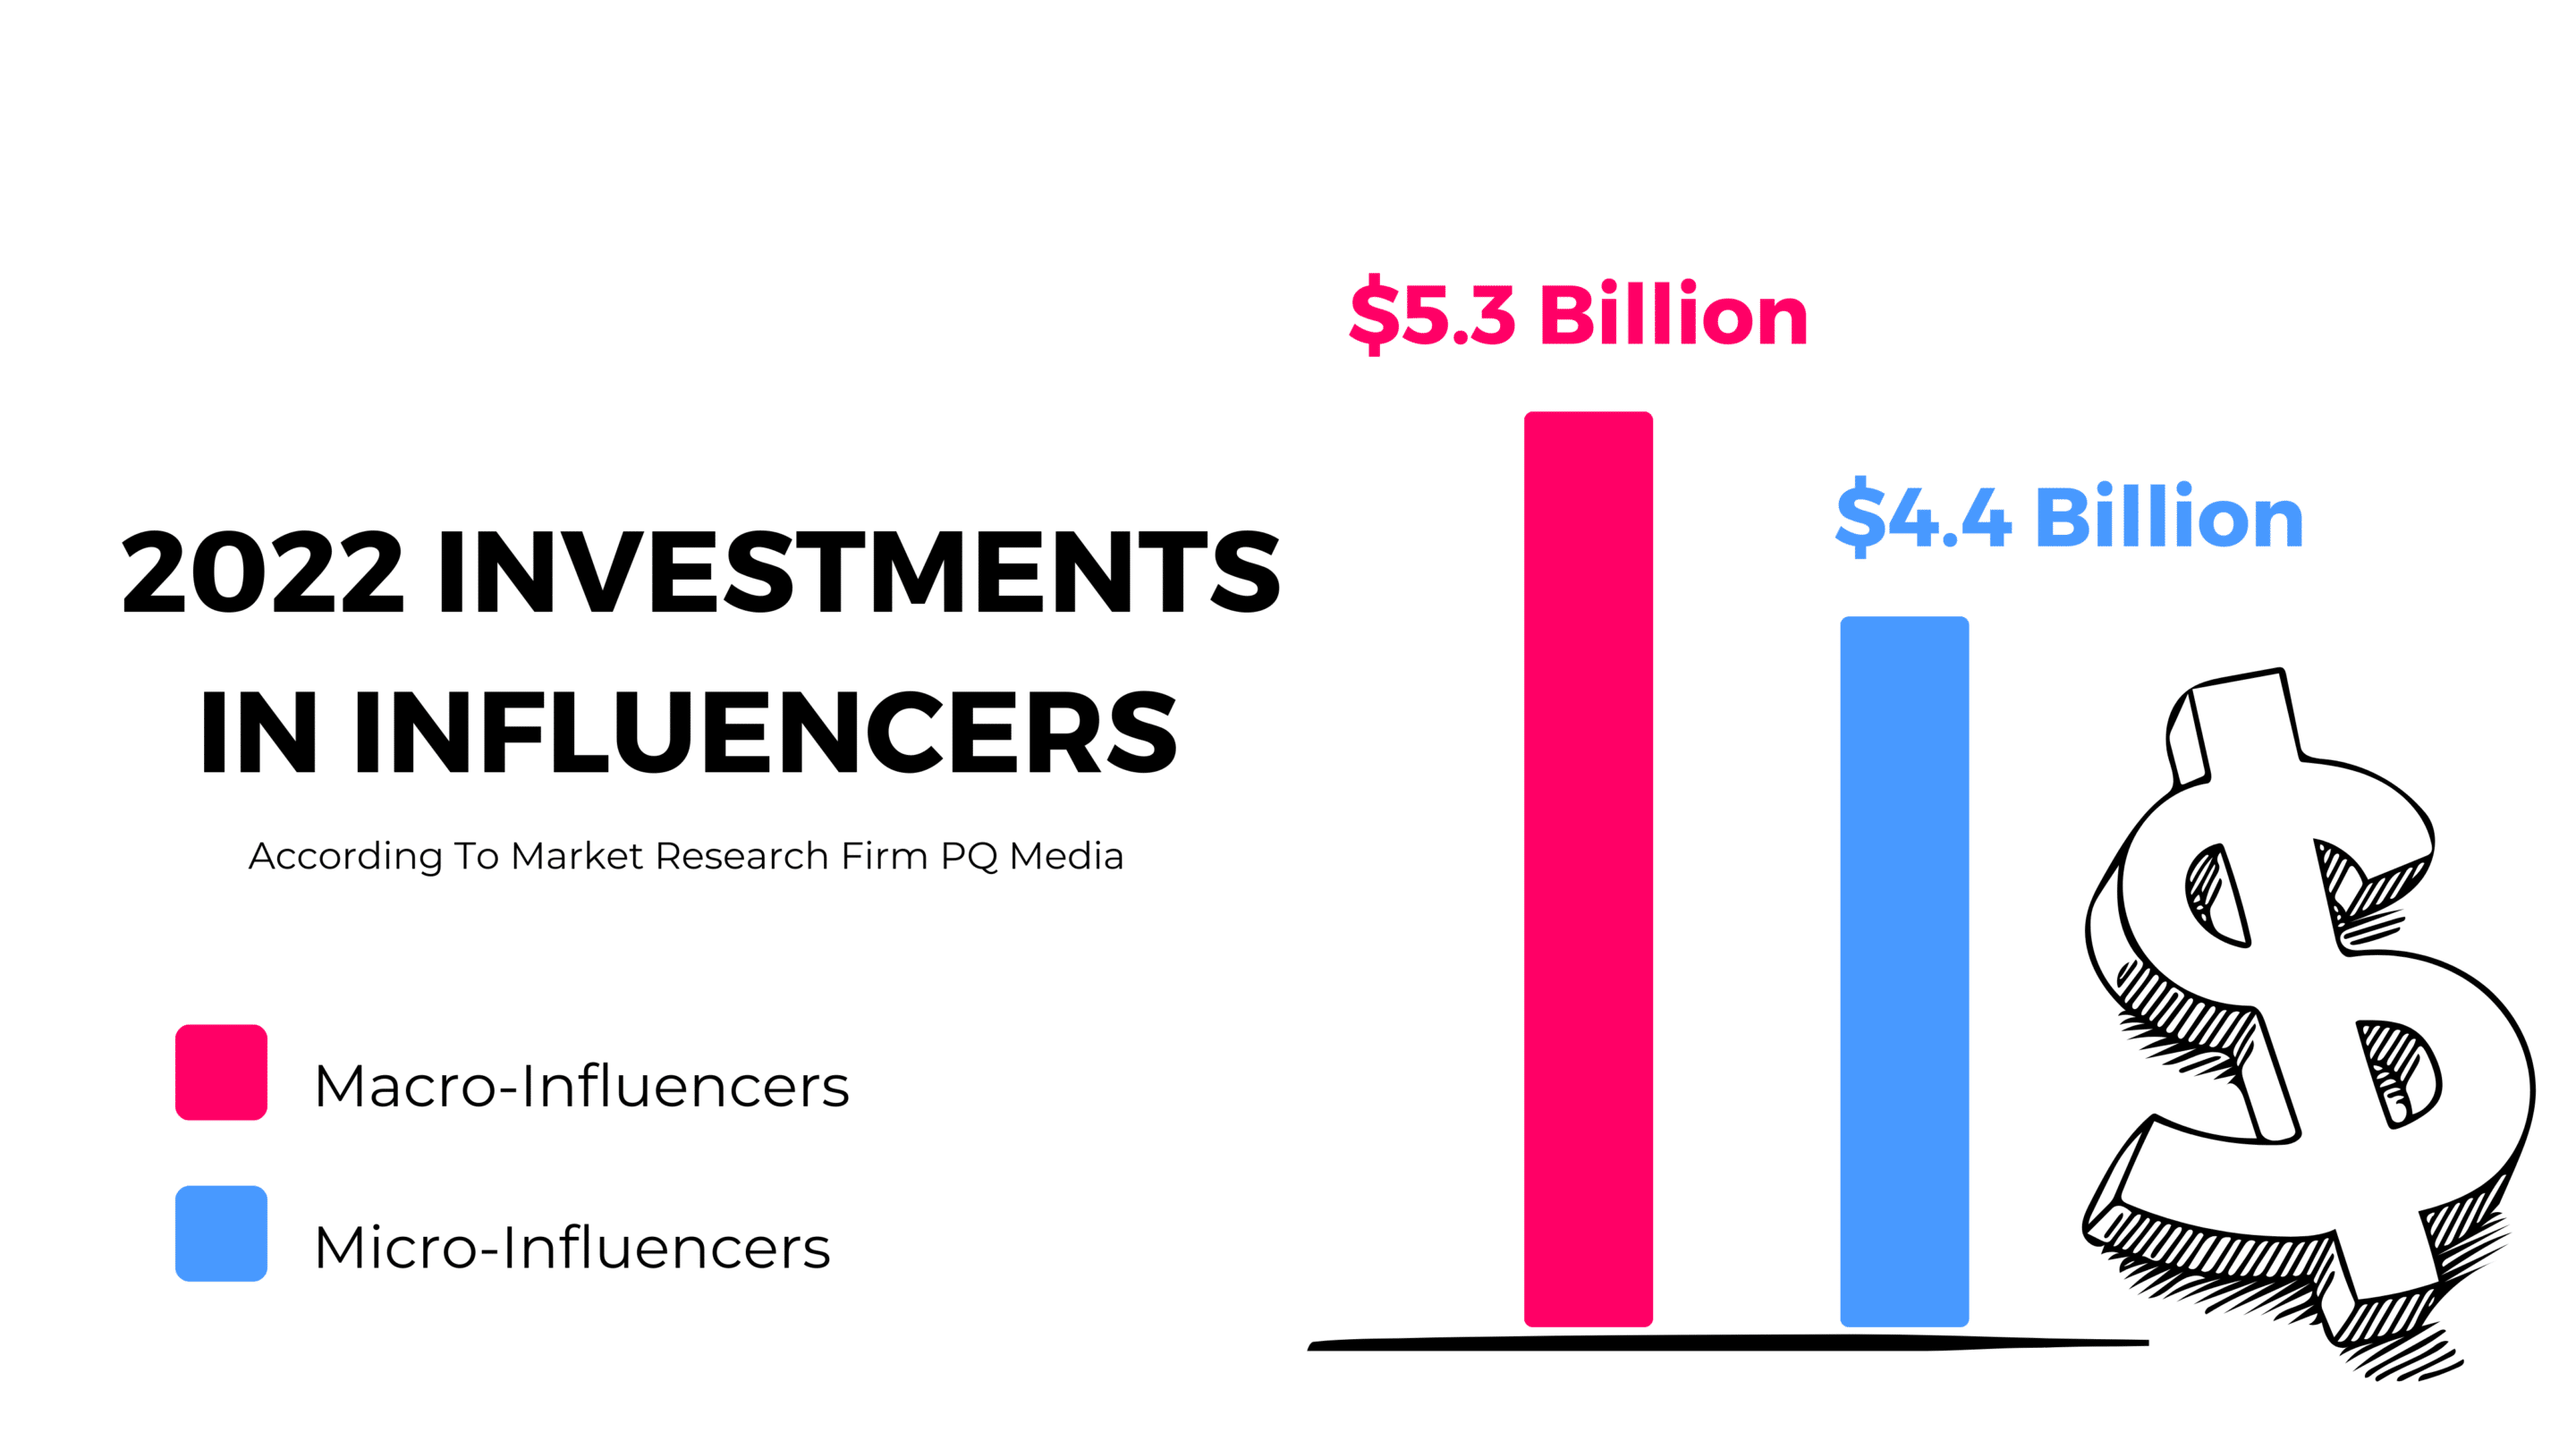 2022 investments on micro vs. macro influencers.